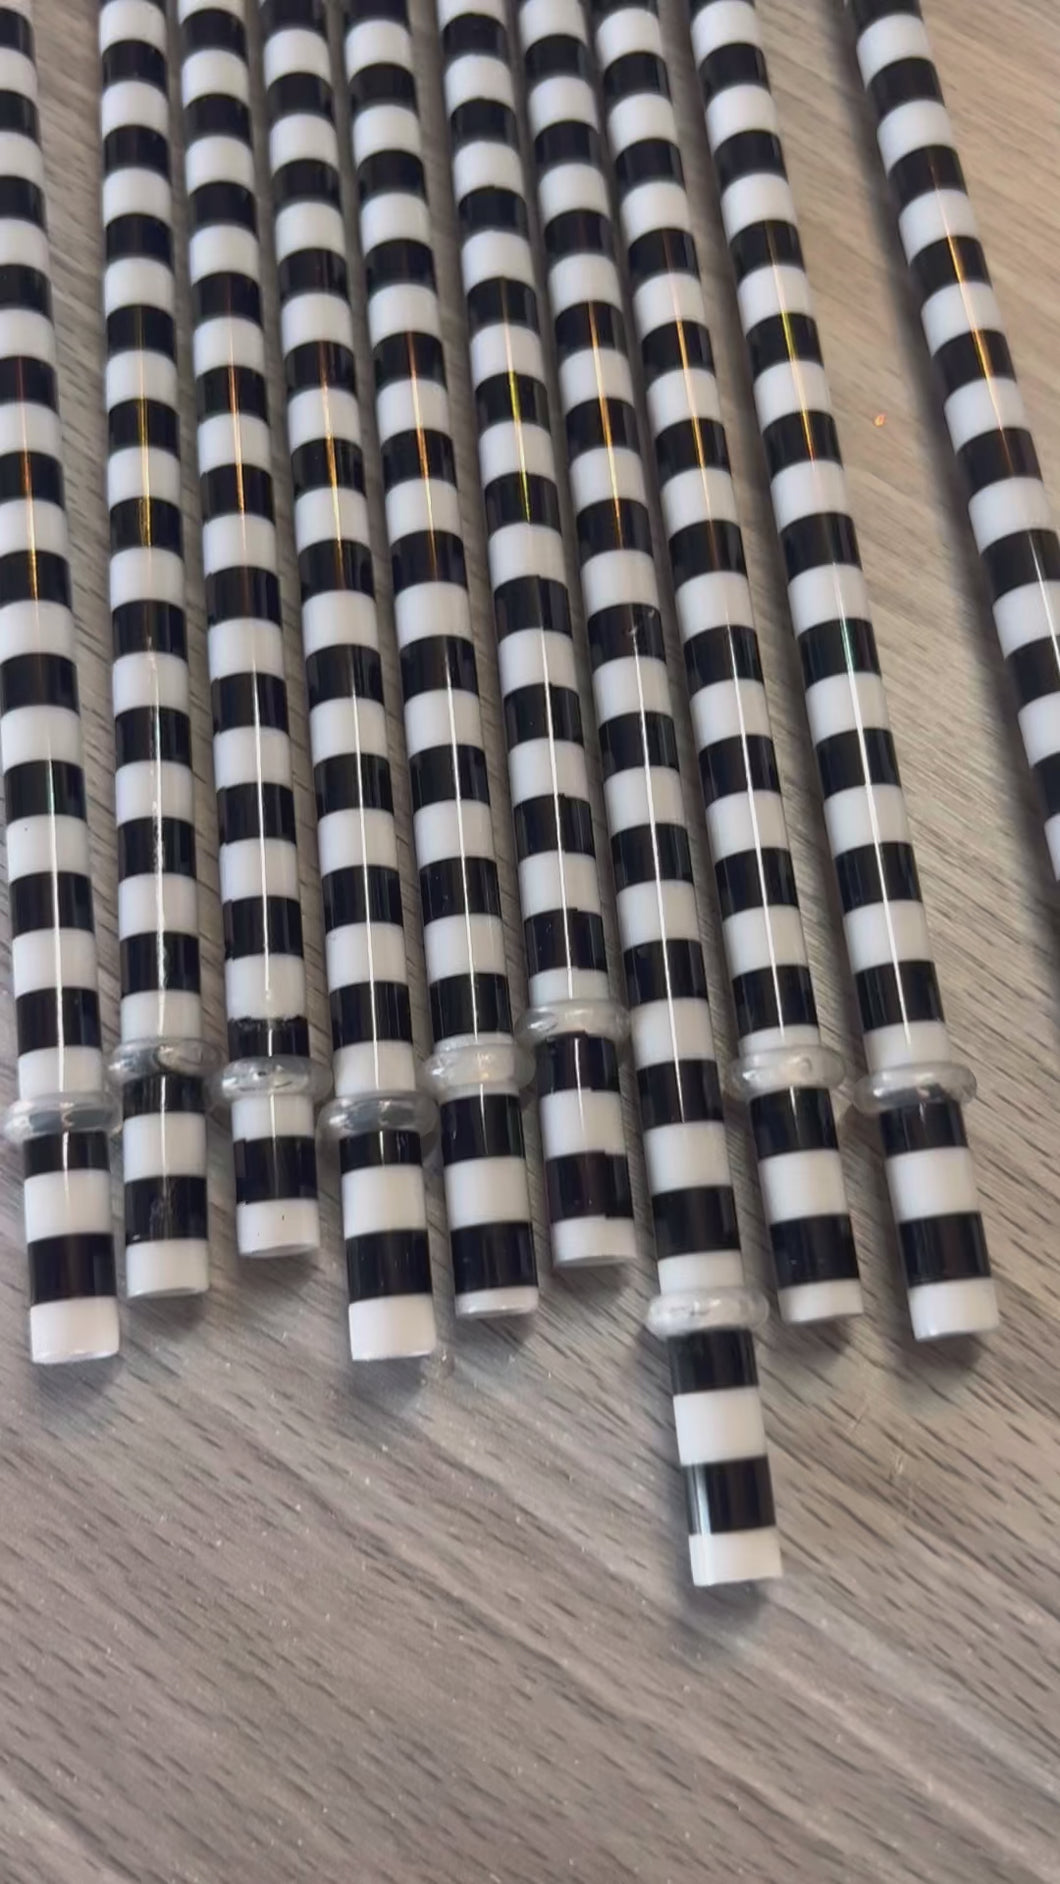 10 Inch Black and White Stripped Halloween Straws Plastic Reusable Straws